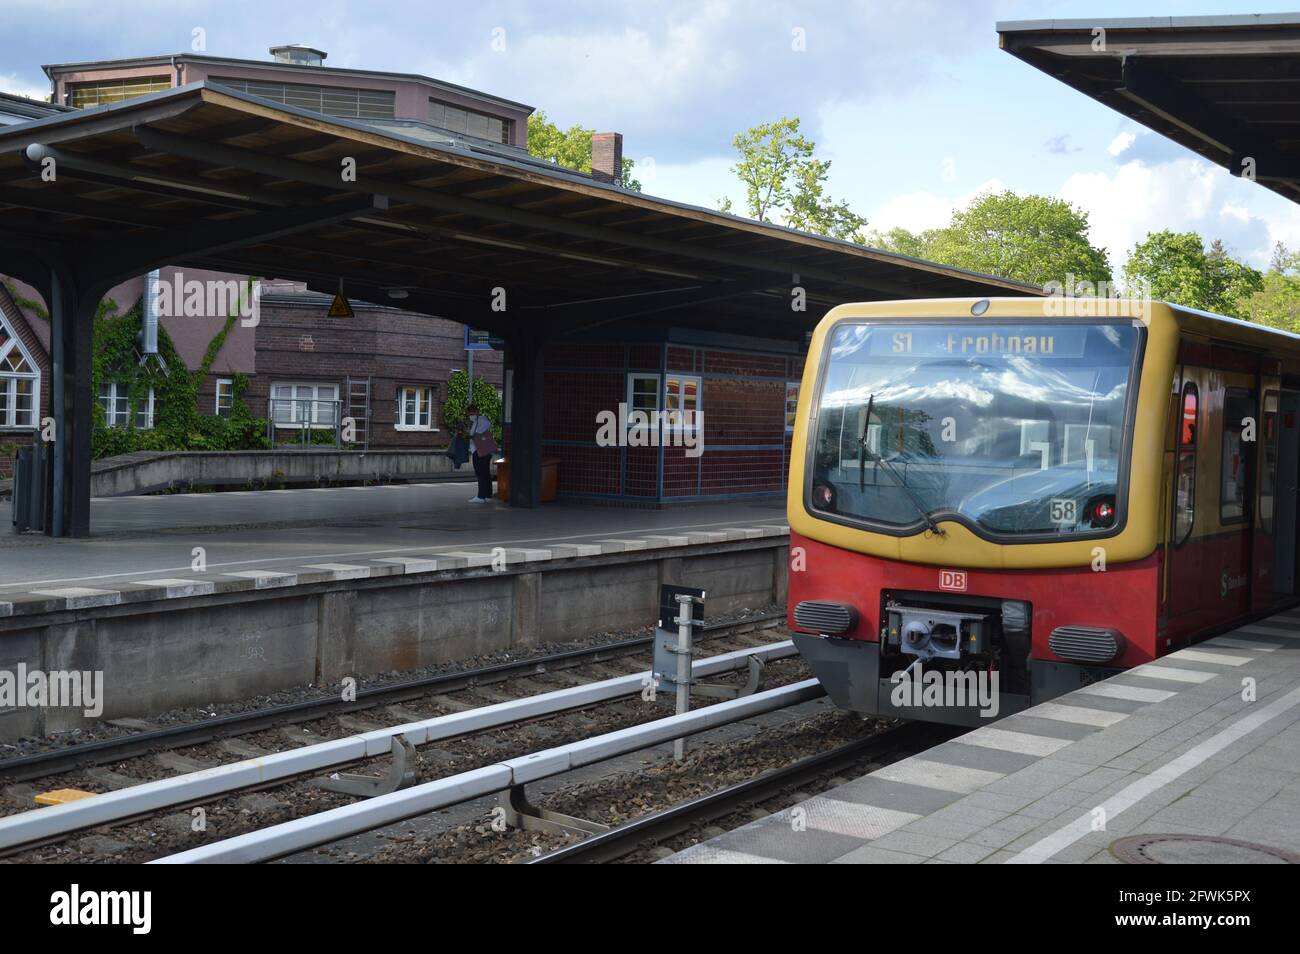 Berlin-Wannsee station - 21st May 2021. Stock Photo